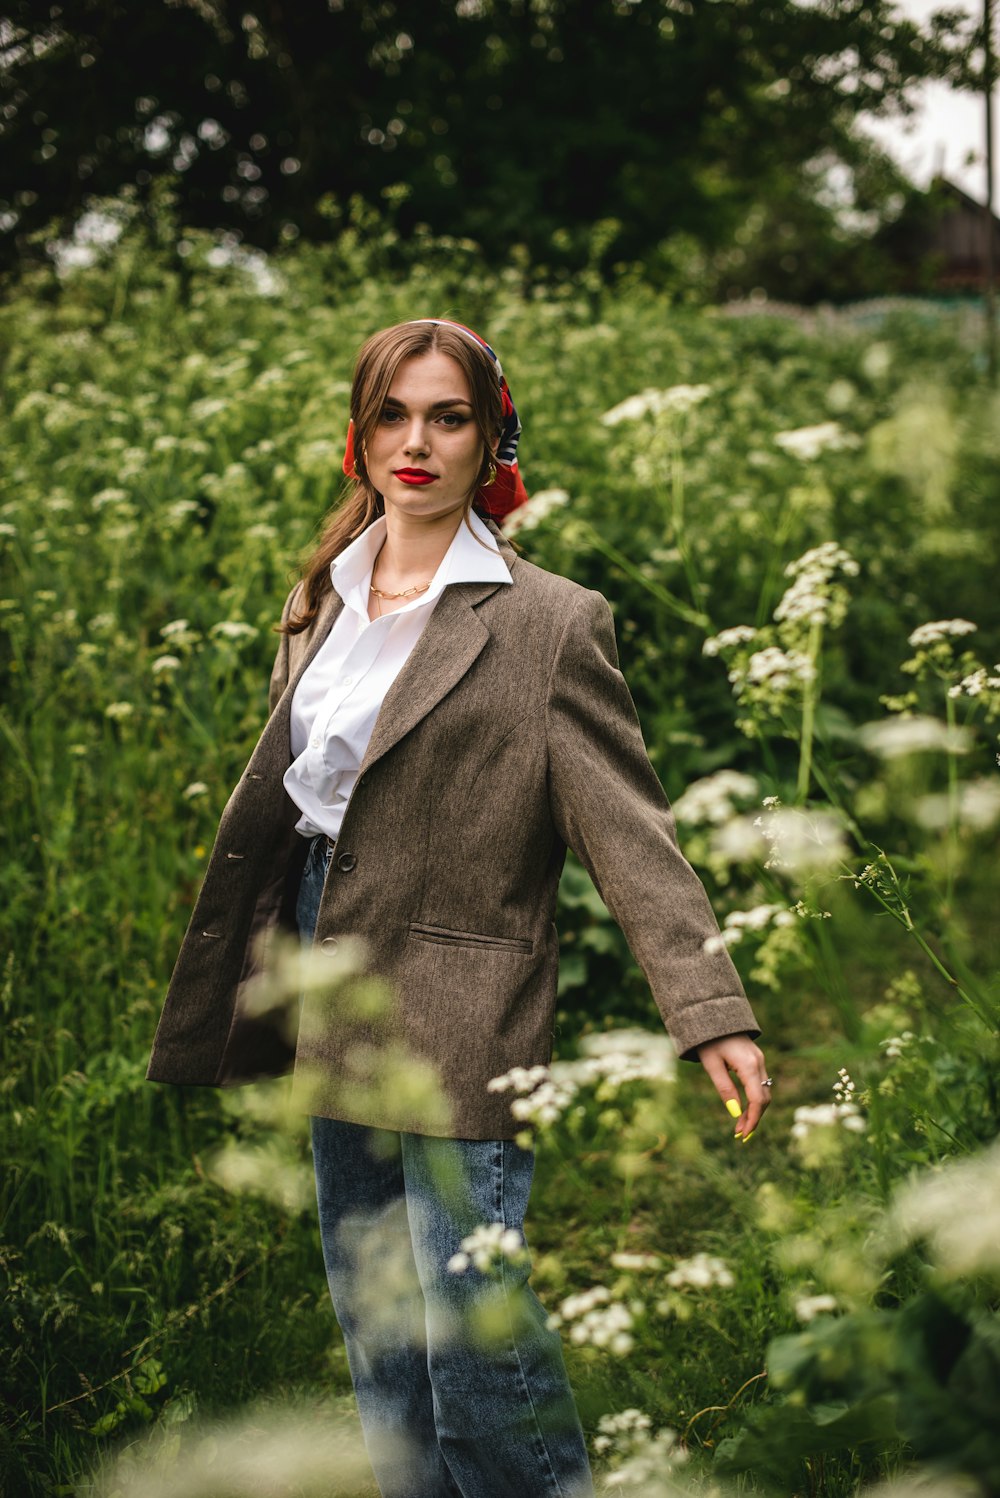 woman in gray blazer standing near green plants during daytime